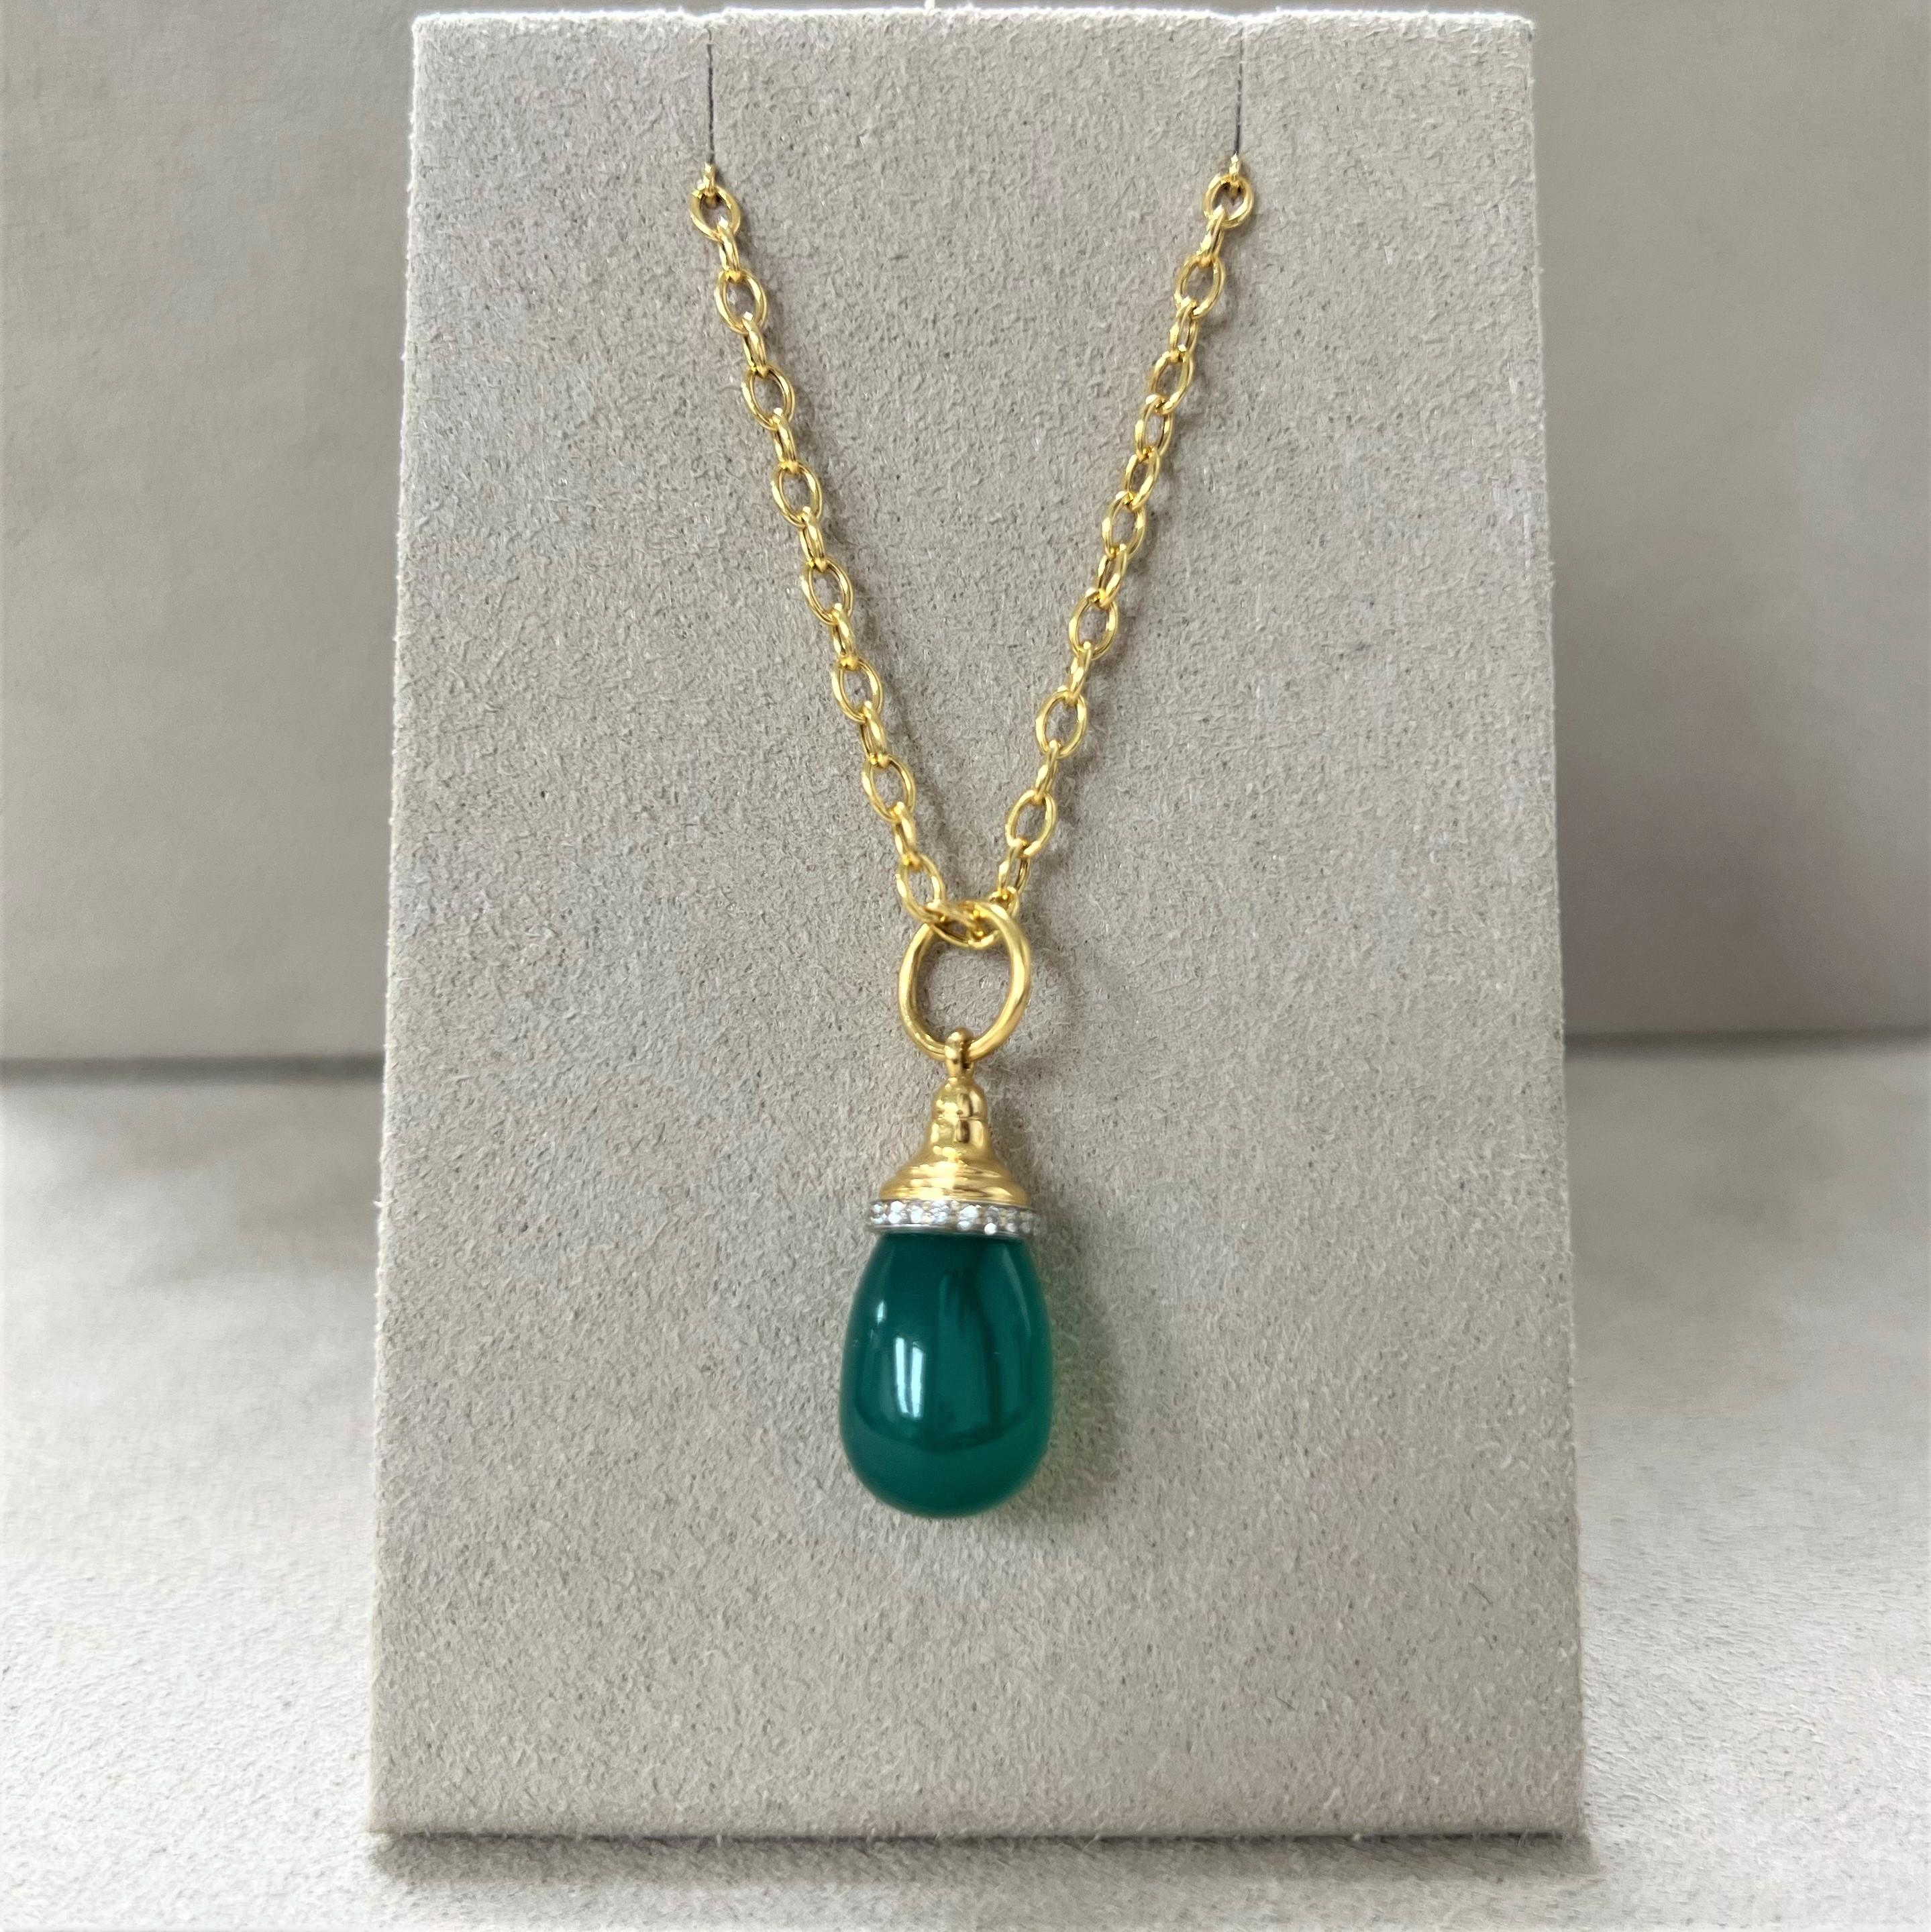 Created in 18 karat yellow gold 
Green chalcedony 10 carats minimum
Diamonds 0.10 carat approx.
Chain sold separately

Exquisitely handcrafted with 18 karat yellow gold, this statement piece boasts a 10 carat minimum of lush green chalcedony and